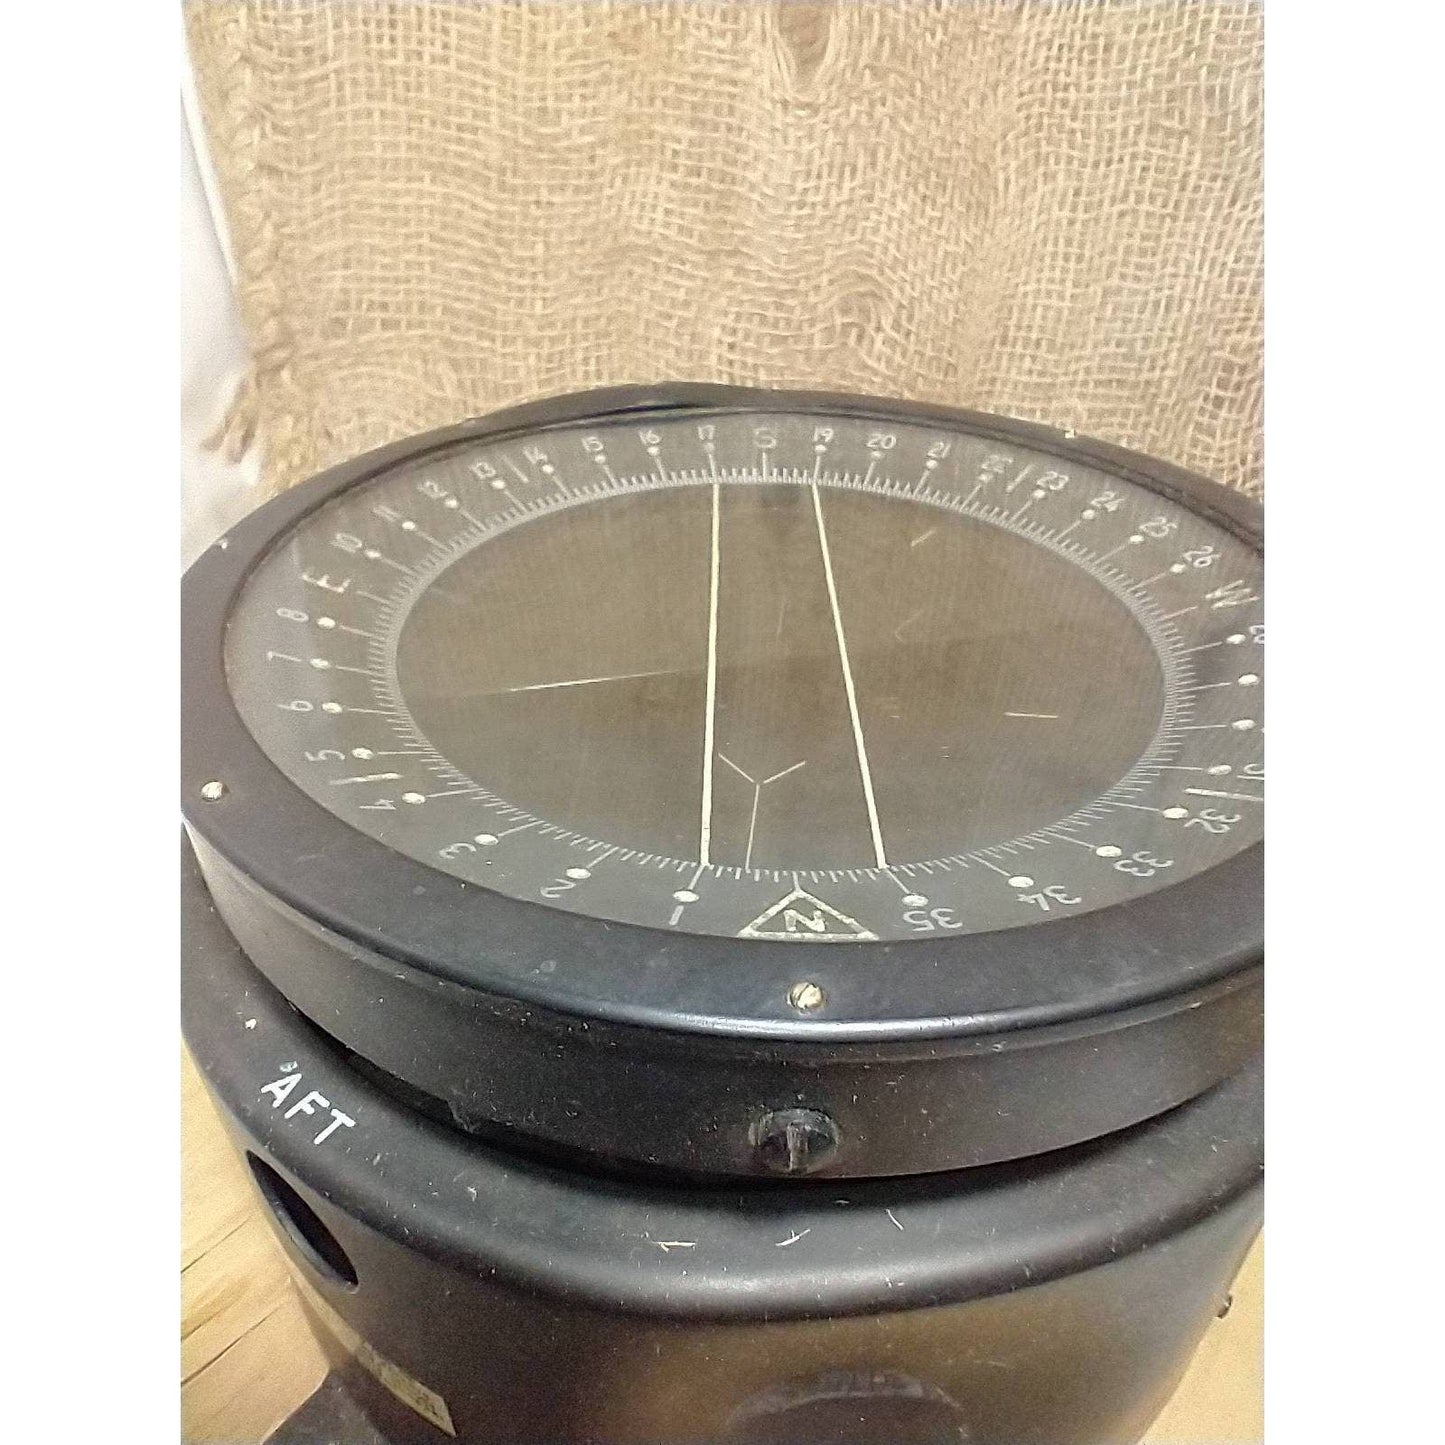 WW2 Bomber Plane Compass D-4 Vintage Antique steampunk in wooden box museum display aviation